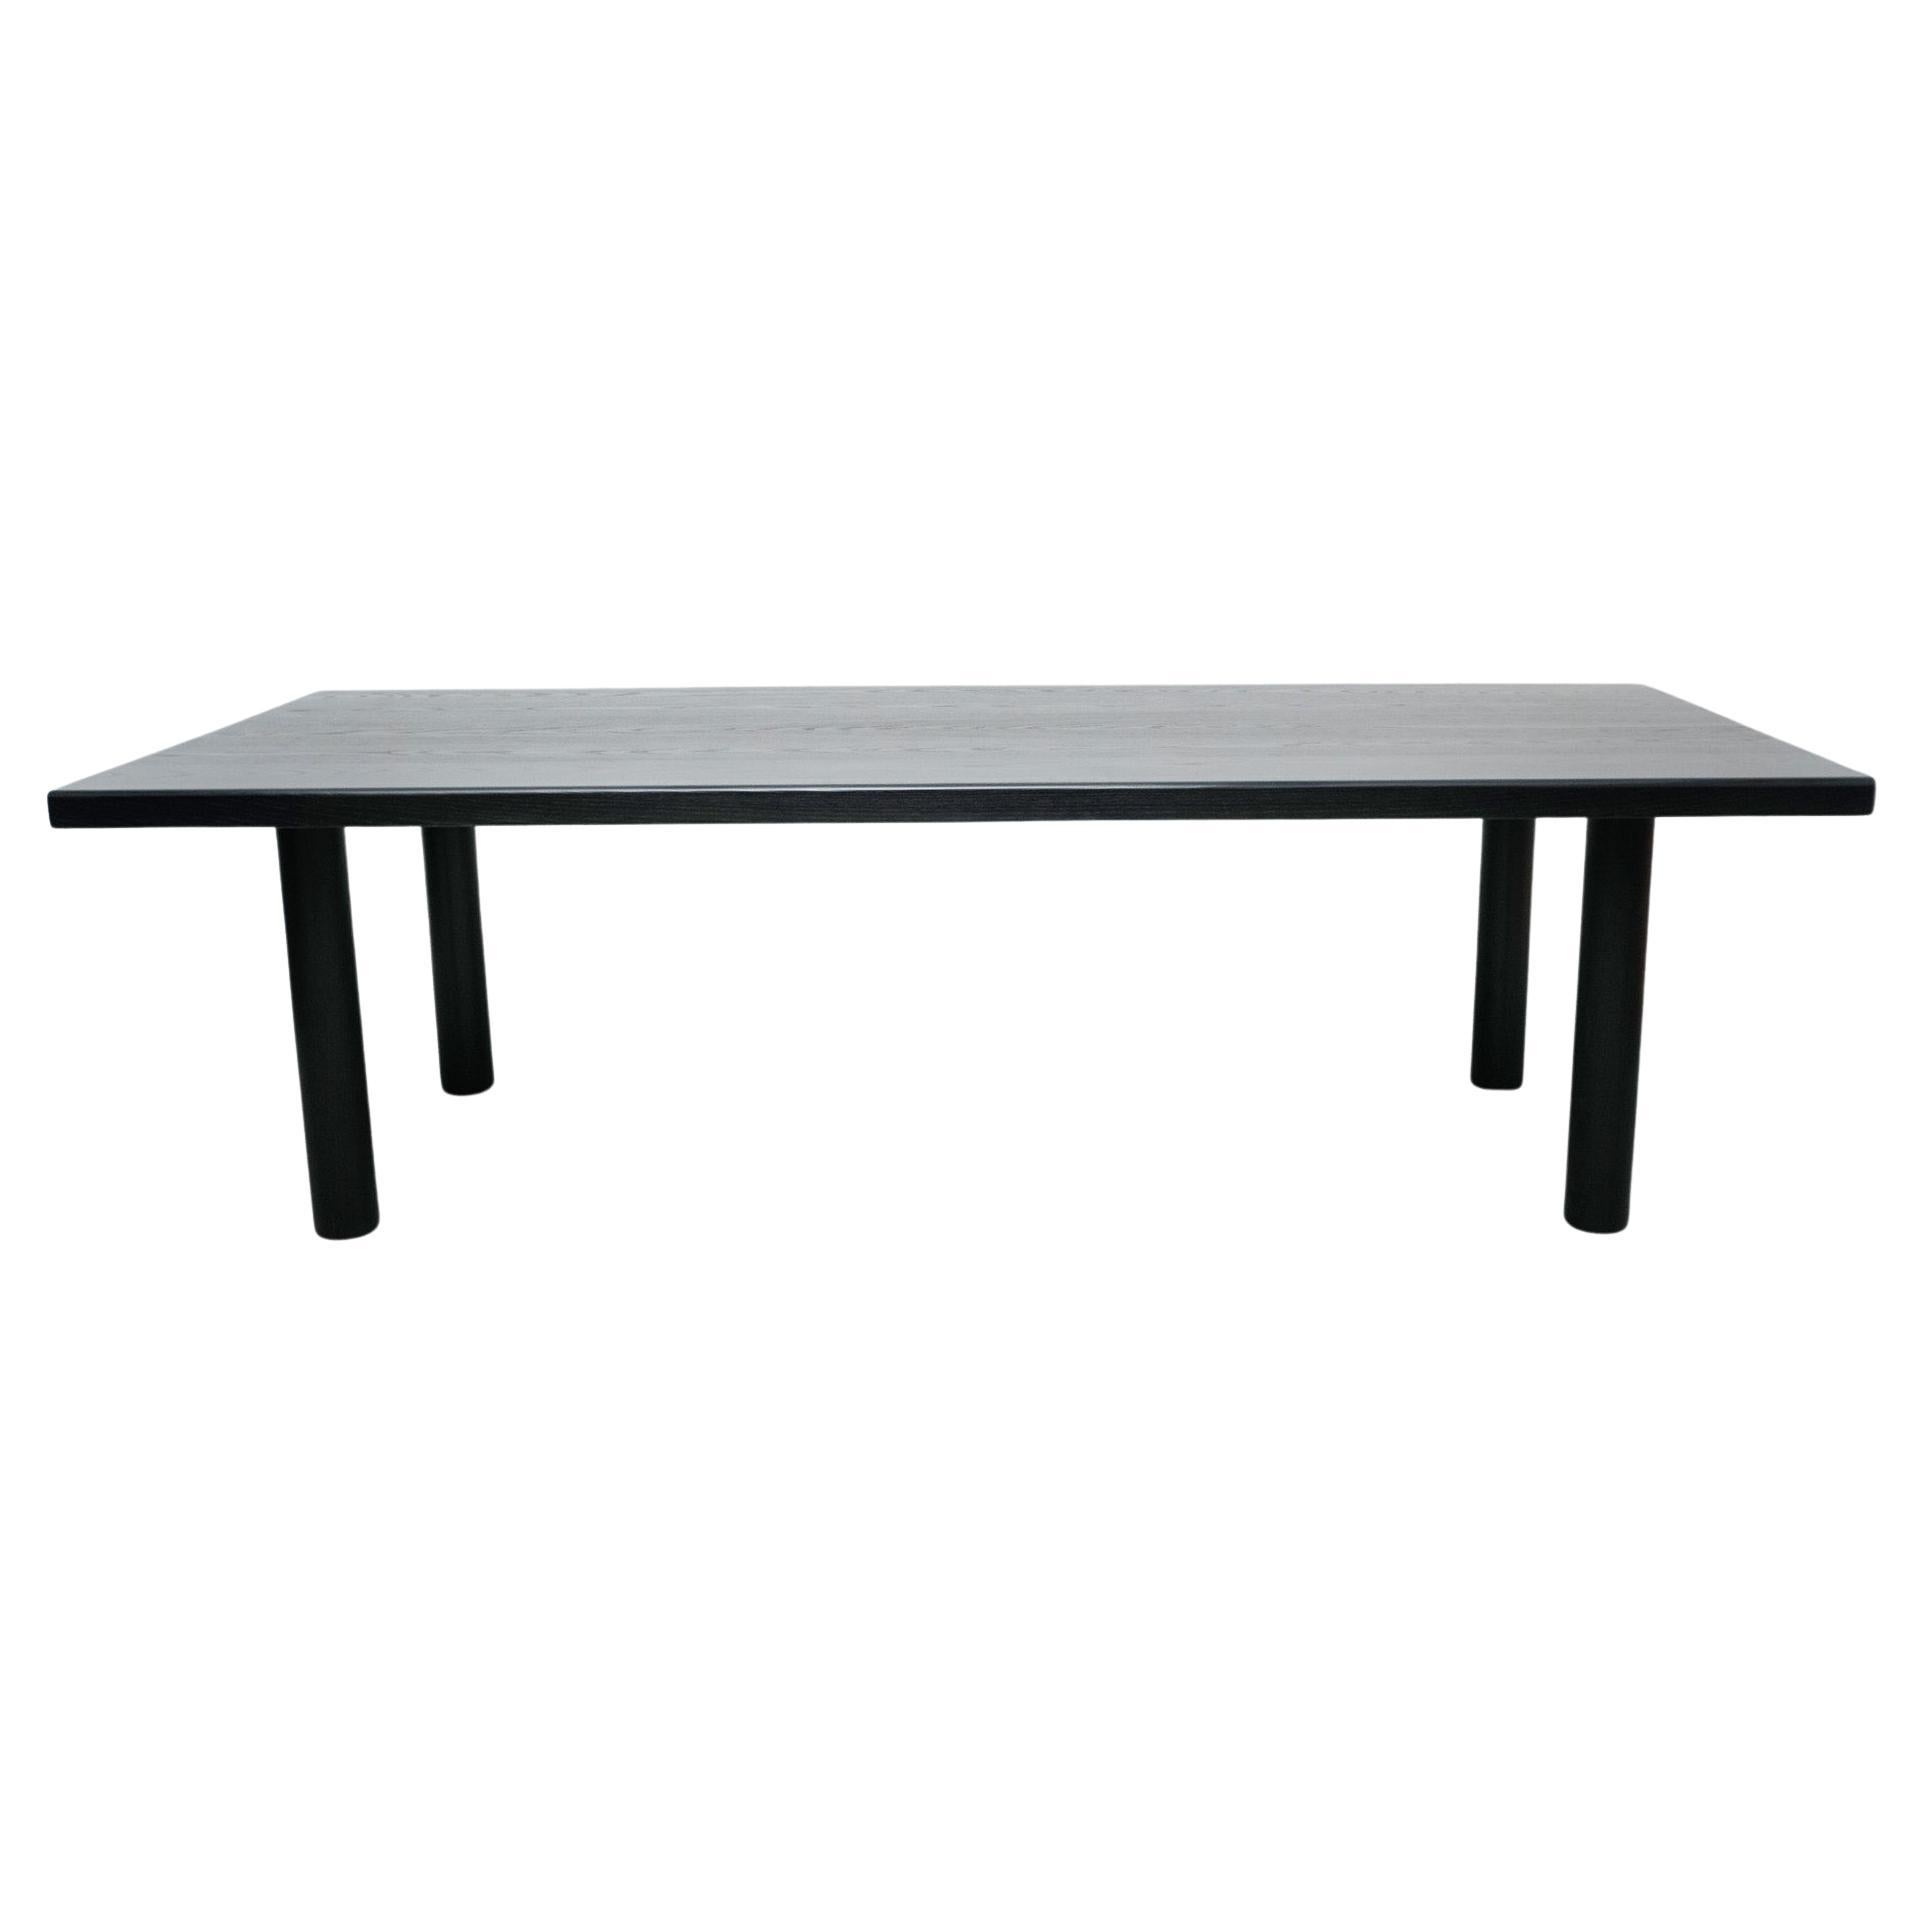 Dada Est. Contemporary Solid Ash Wood Black Lacquered Dining Table